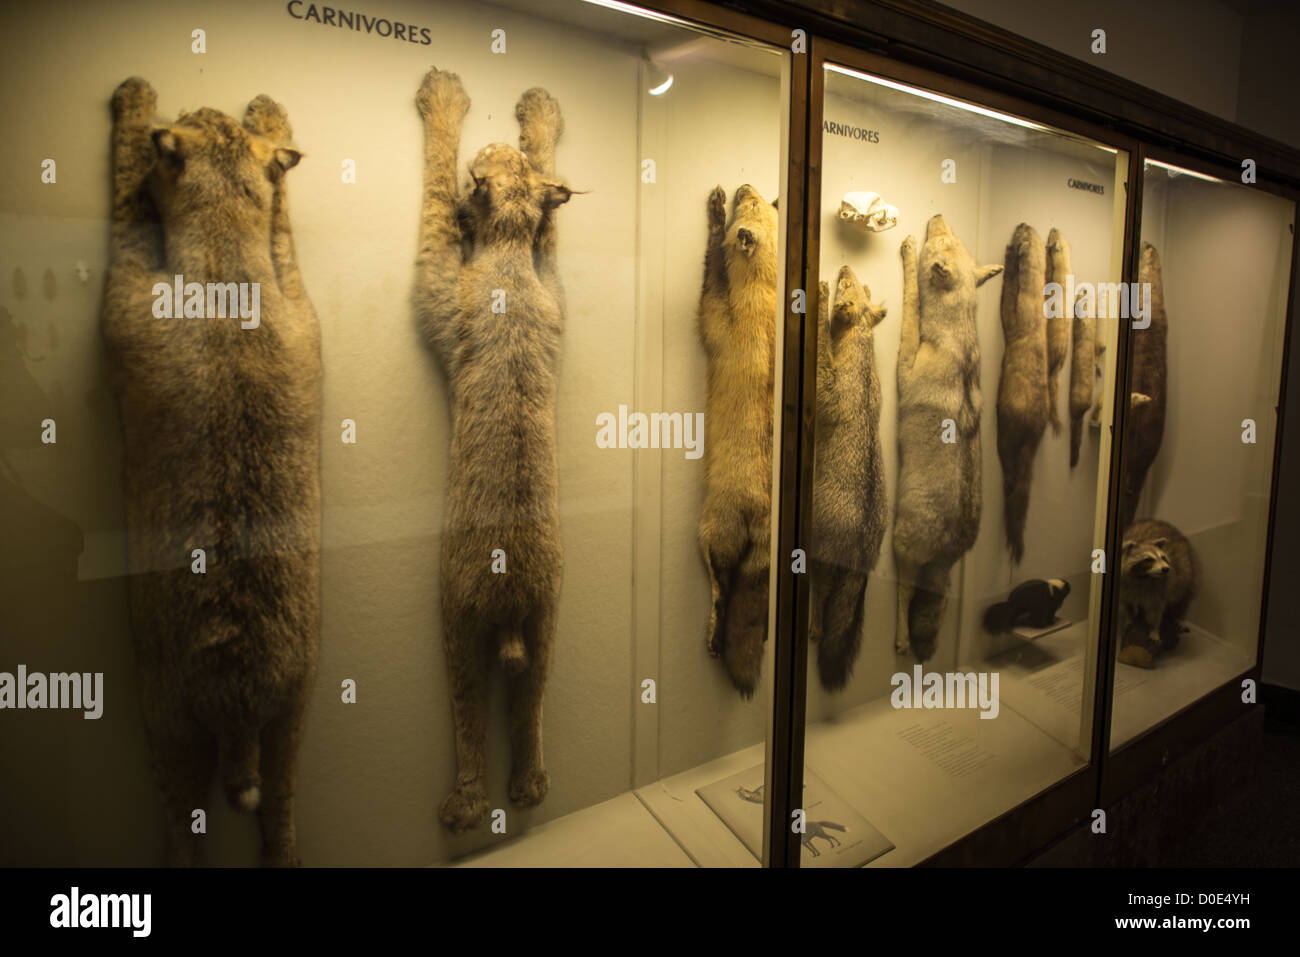 NEW YORK, NY - Carnivores specimens in a display case at the Museum of Natural History in New York's Upper West Side neighborhood, adjacent to Central Park. Stock Photo